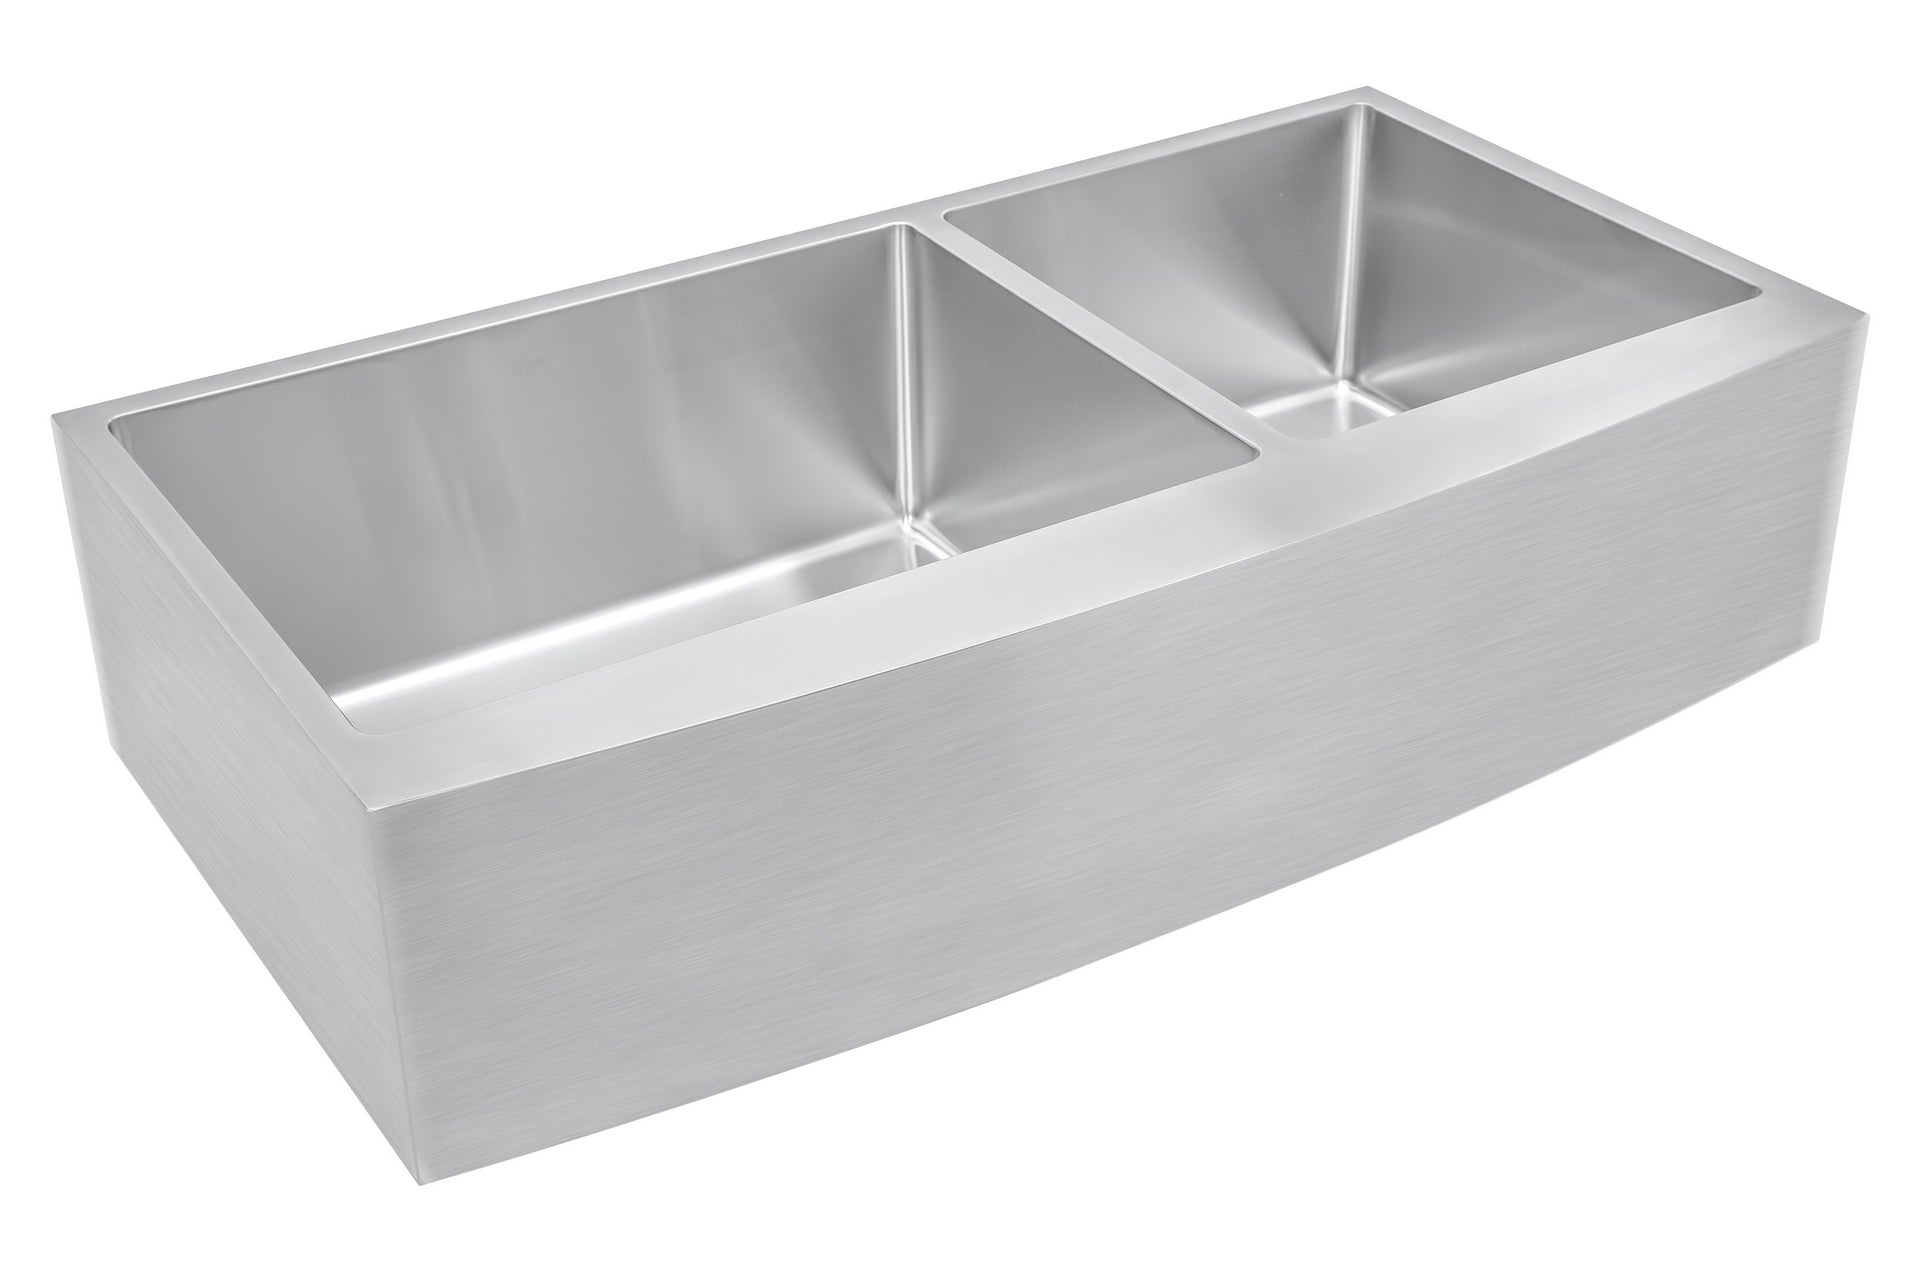 Farmhouse Apron Curve Front 16 Gauge Stainless Steel Double Bowl 60/40 Offset Kitchen Sink with 15mm Radius Corner Design